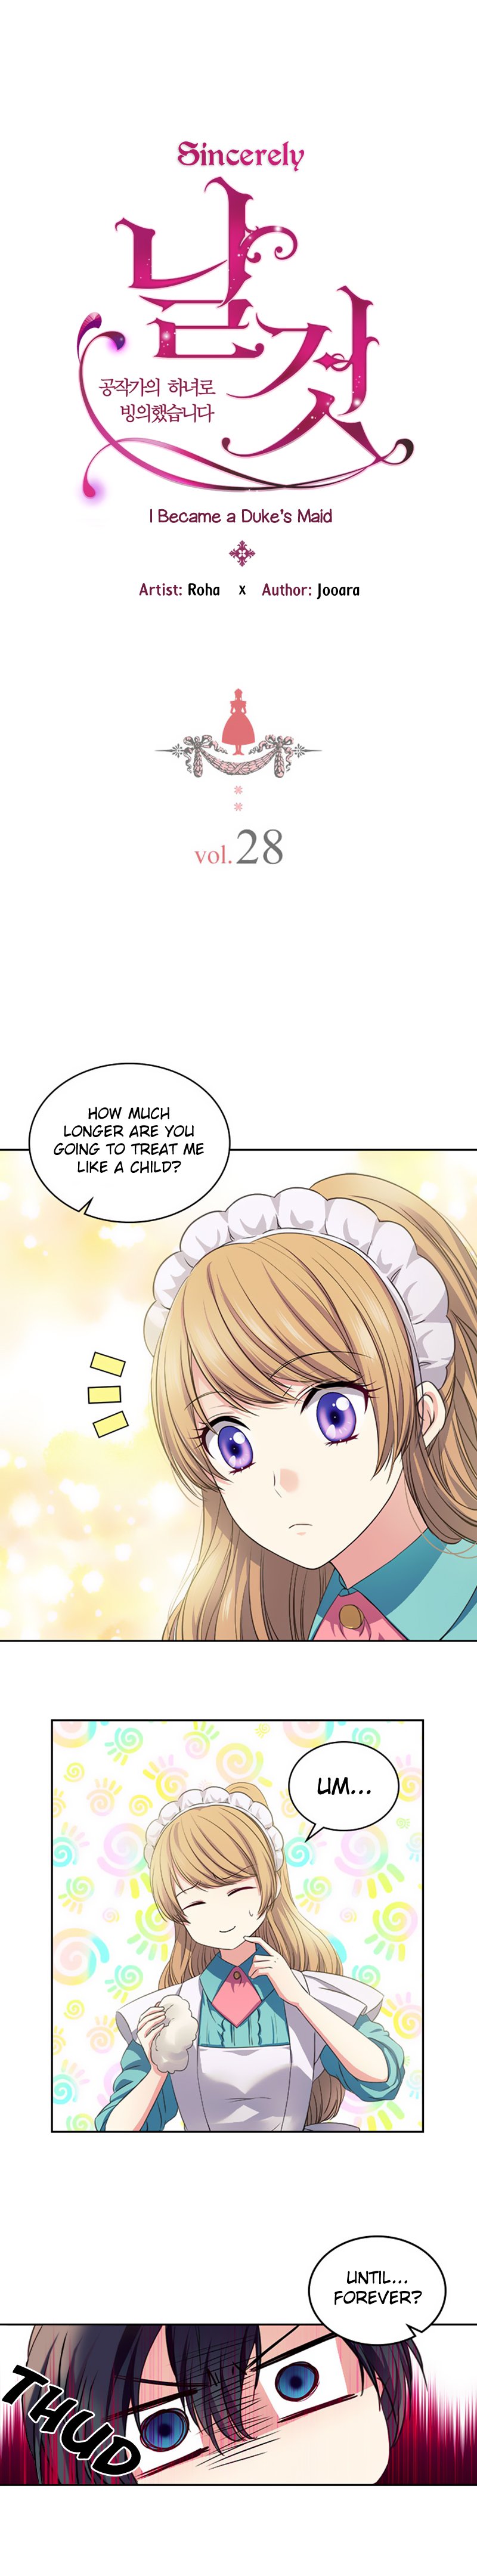 Sincerely: I Became a Duke’s Maid chapter 28